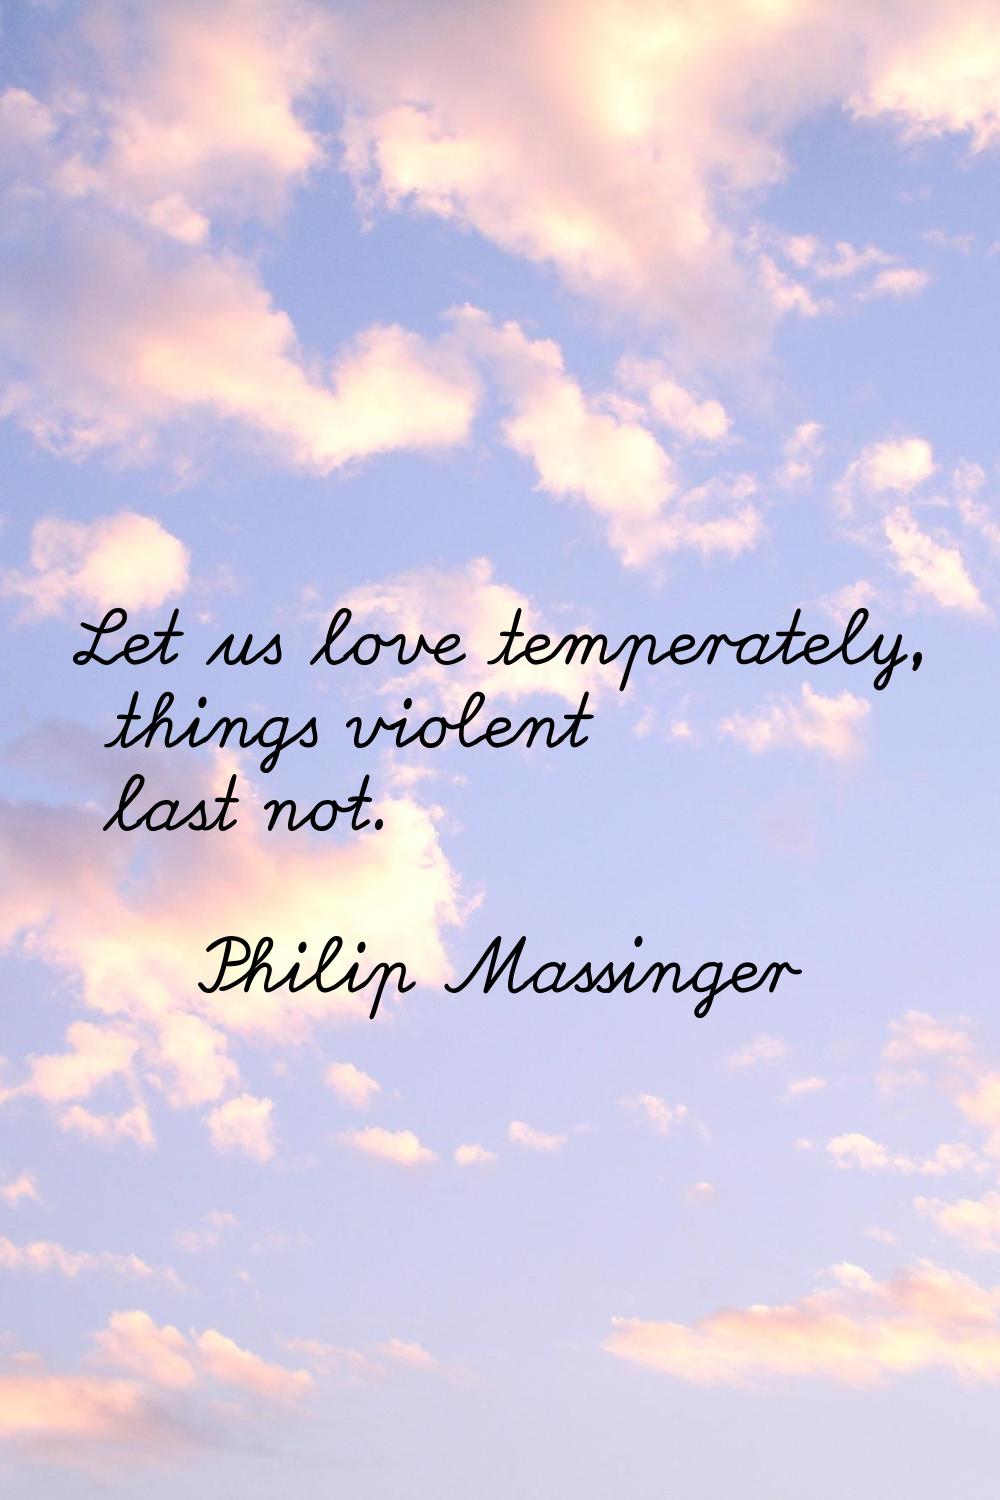 Let us love temperately, things violent last not.